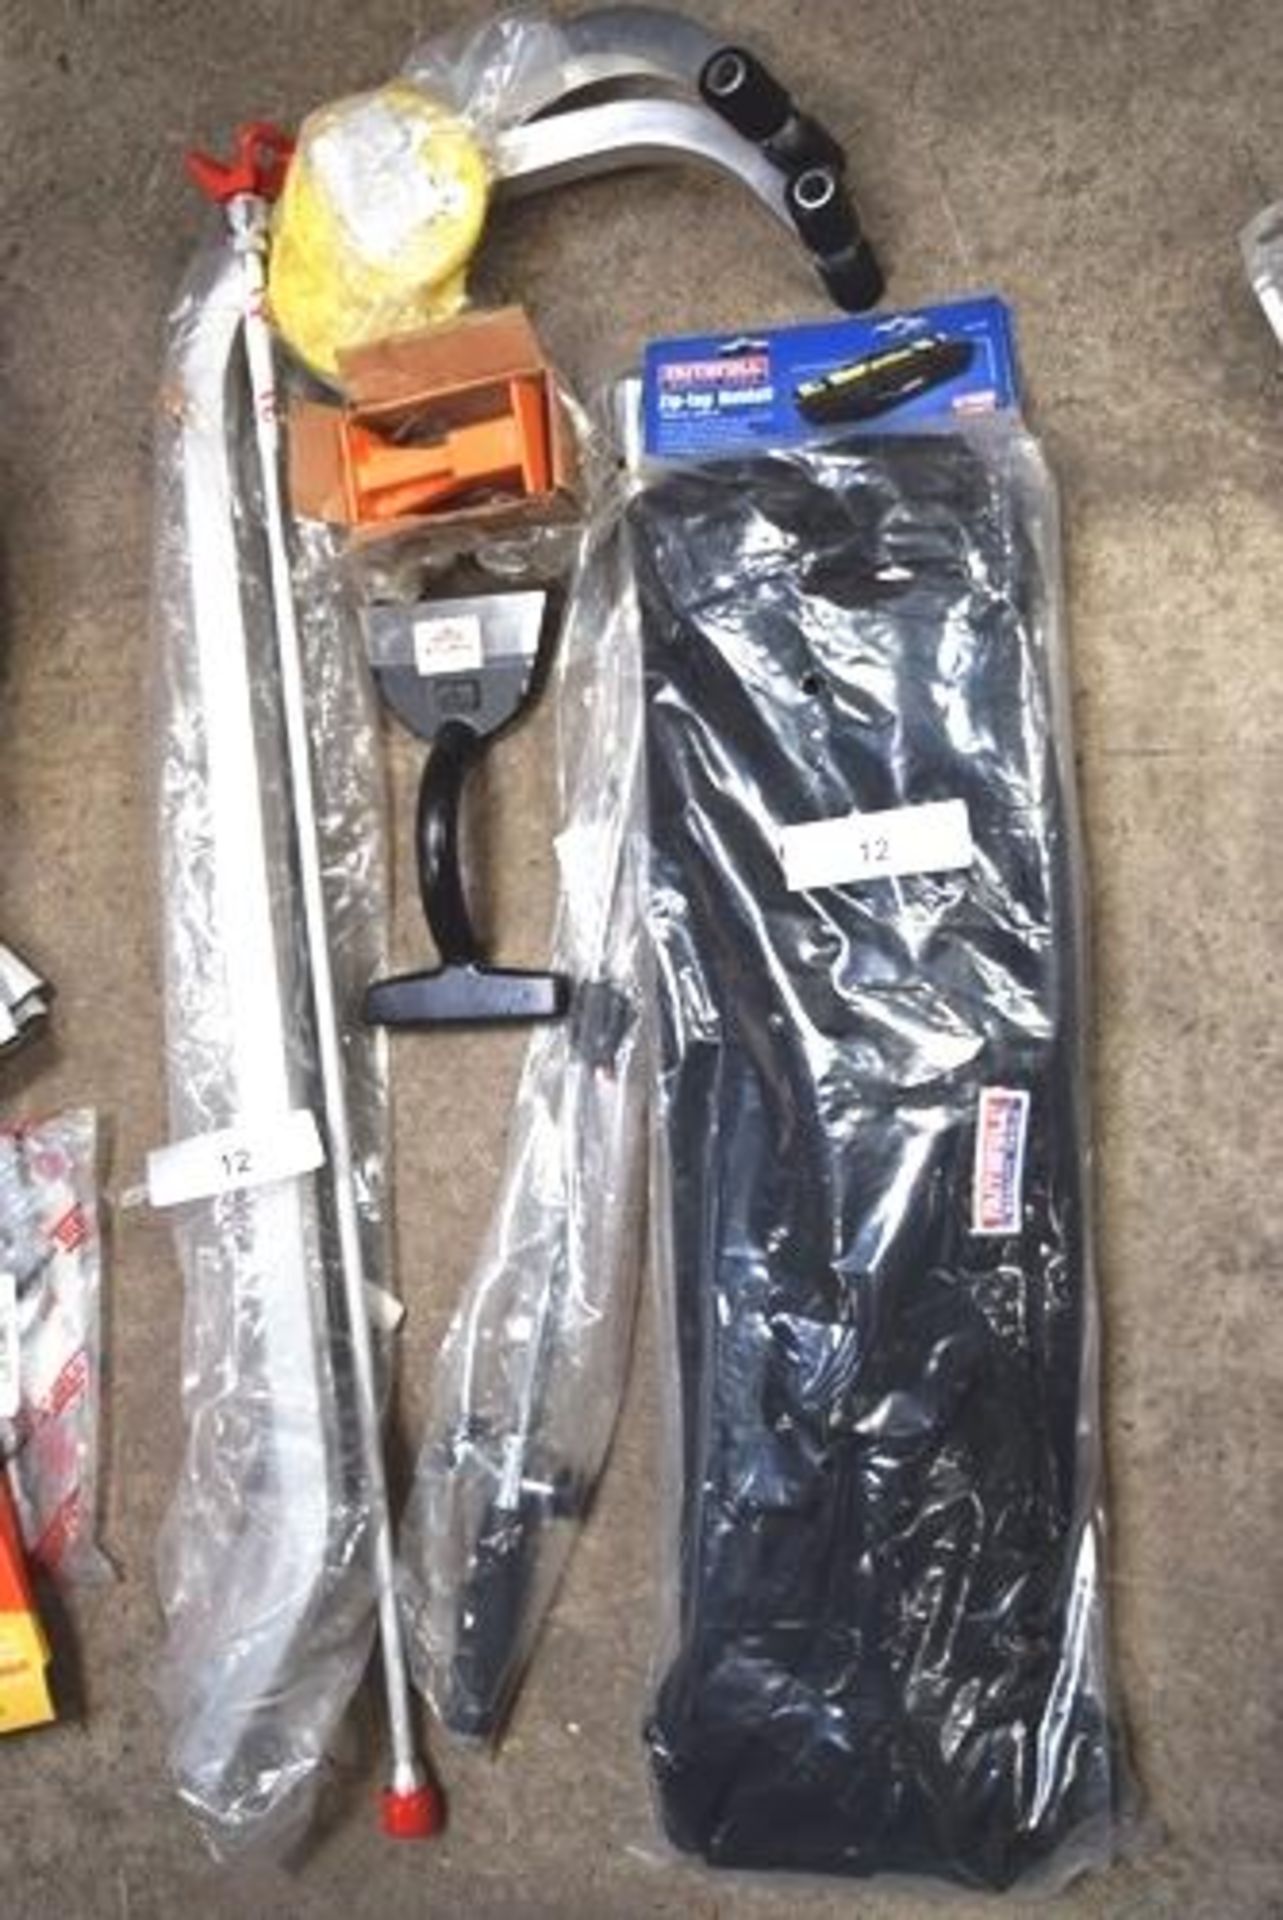 A quantity of tools including Faithfull zip top holdalls, ladder hooks, gas weed killer etc. - Mixed